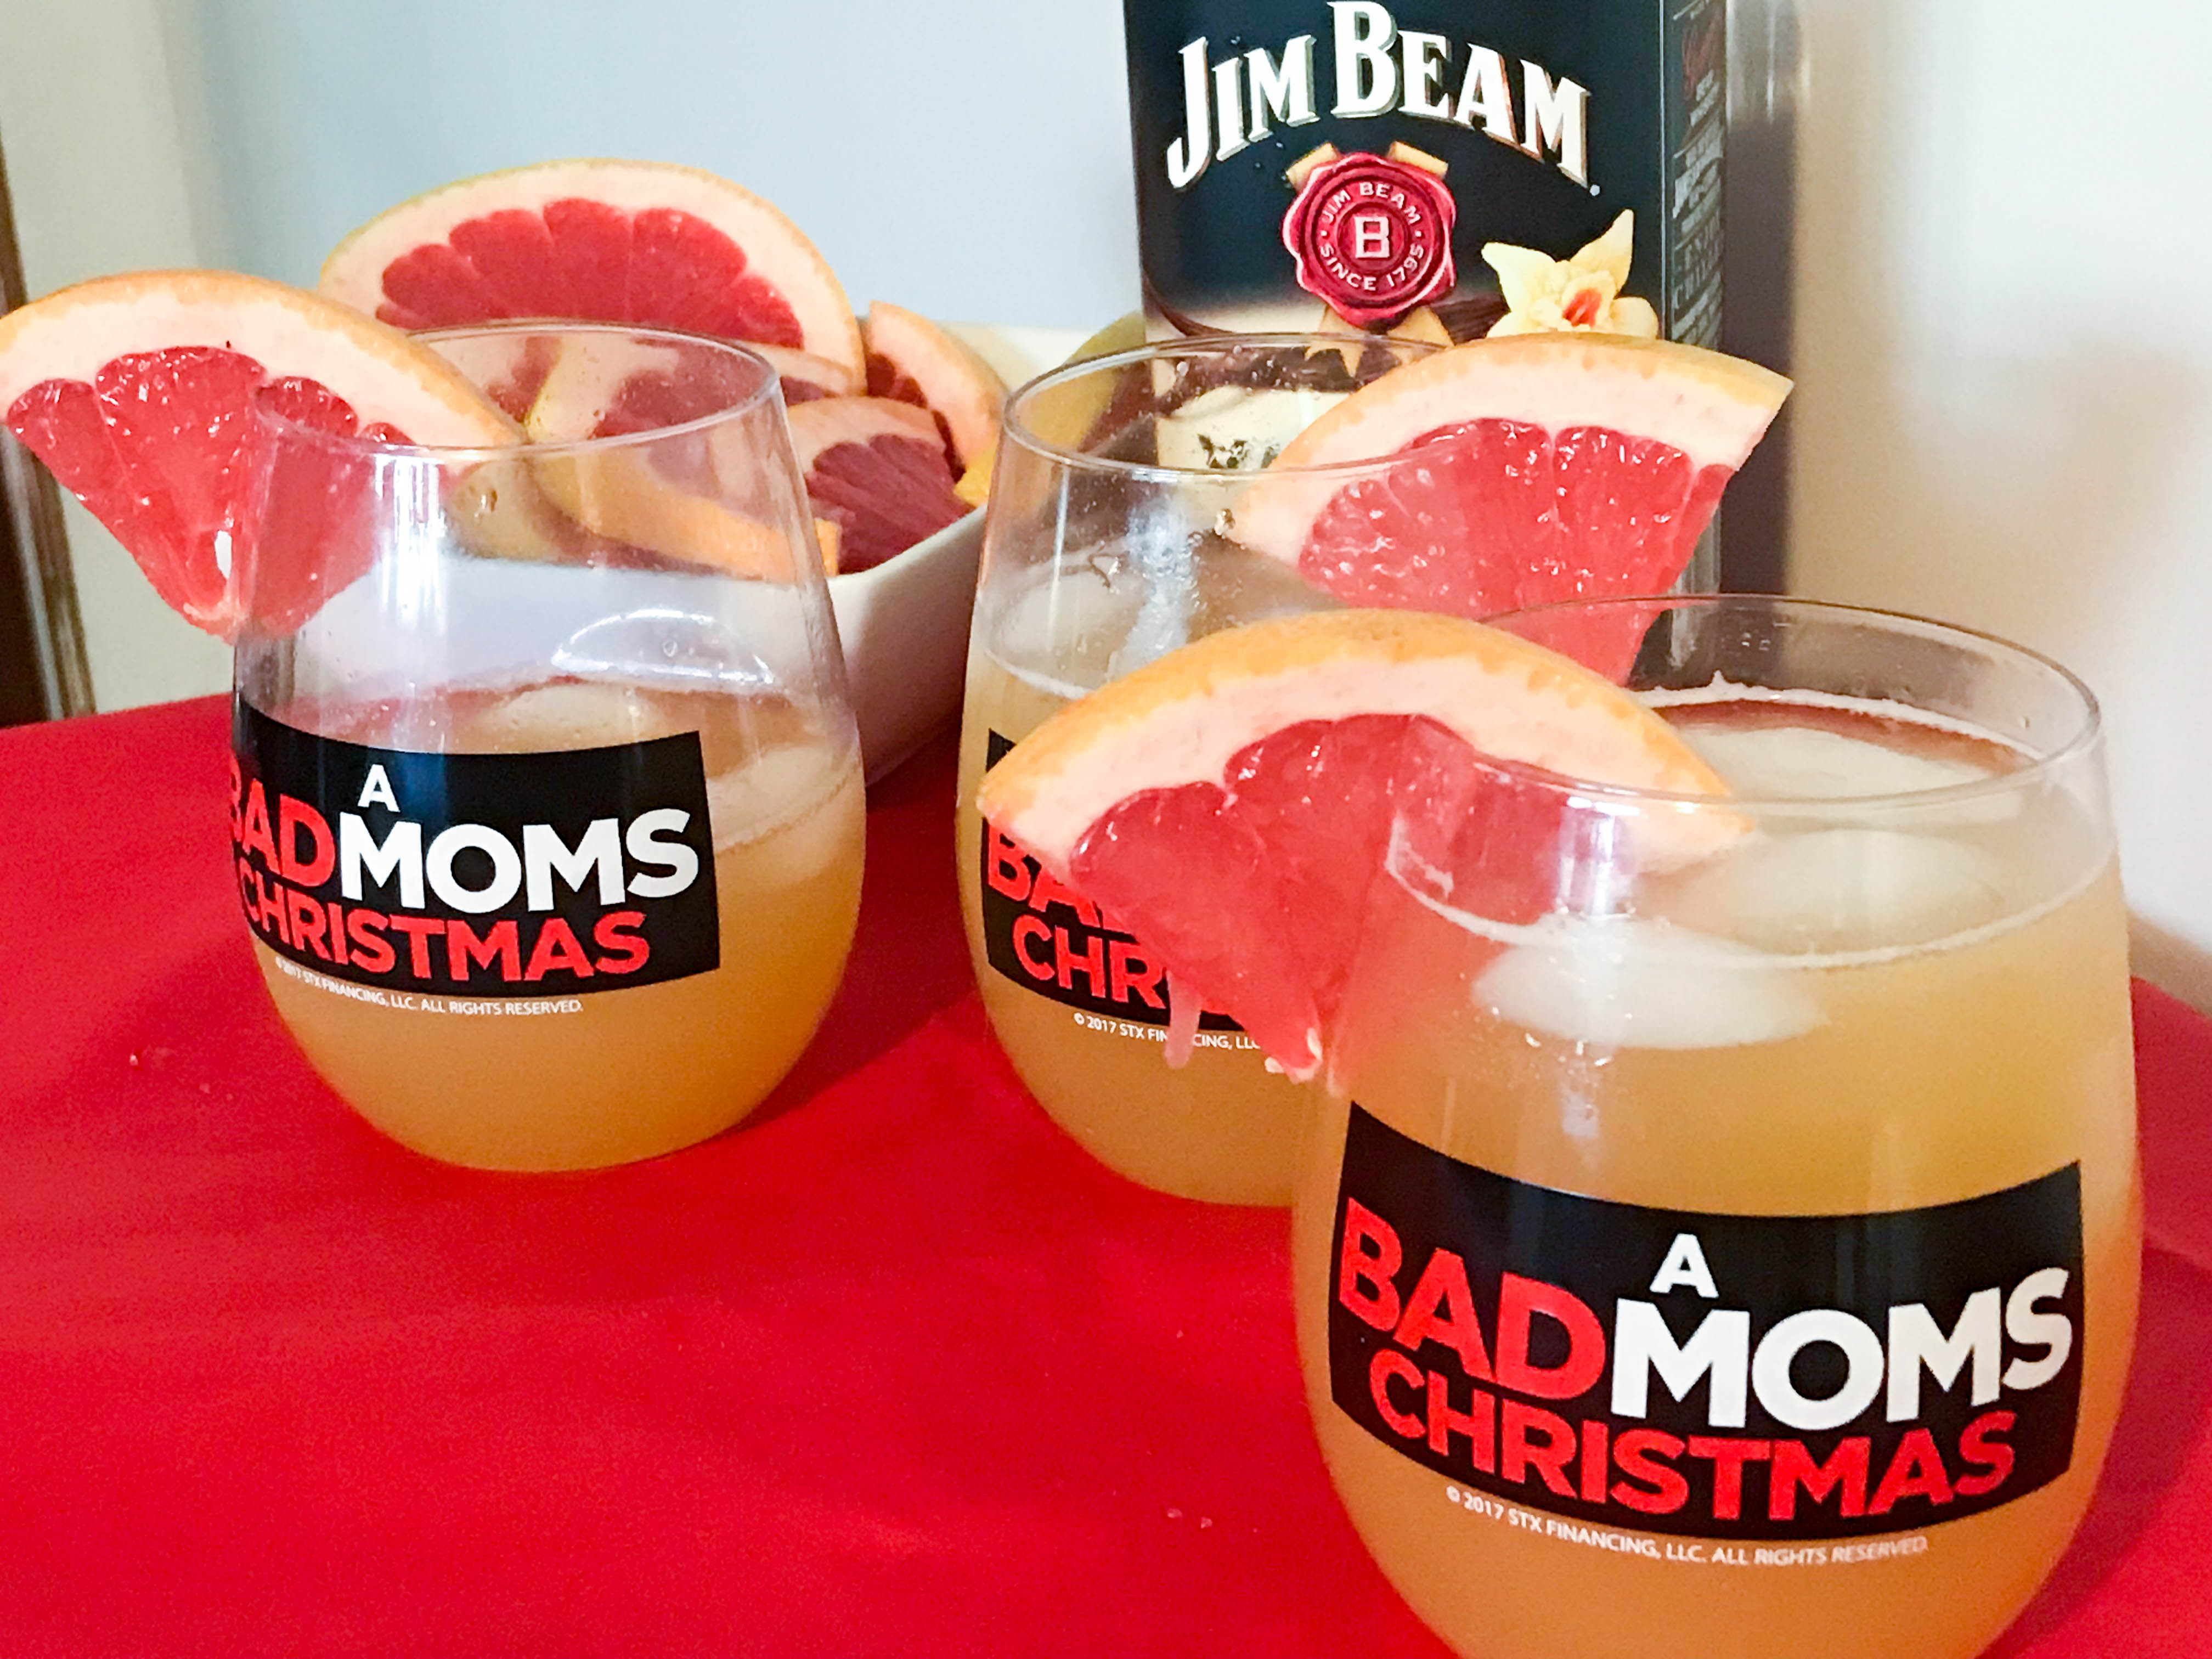 Celebrate the holidays with A Bad Moms Christmas and get the recipe for Mila's Signature Jim Bean® Vanilla Cocktail, a favorite of actress Mila Kunis.